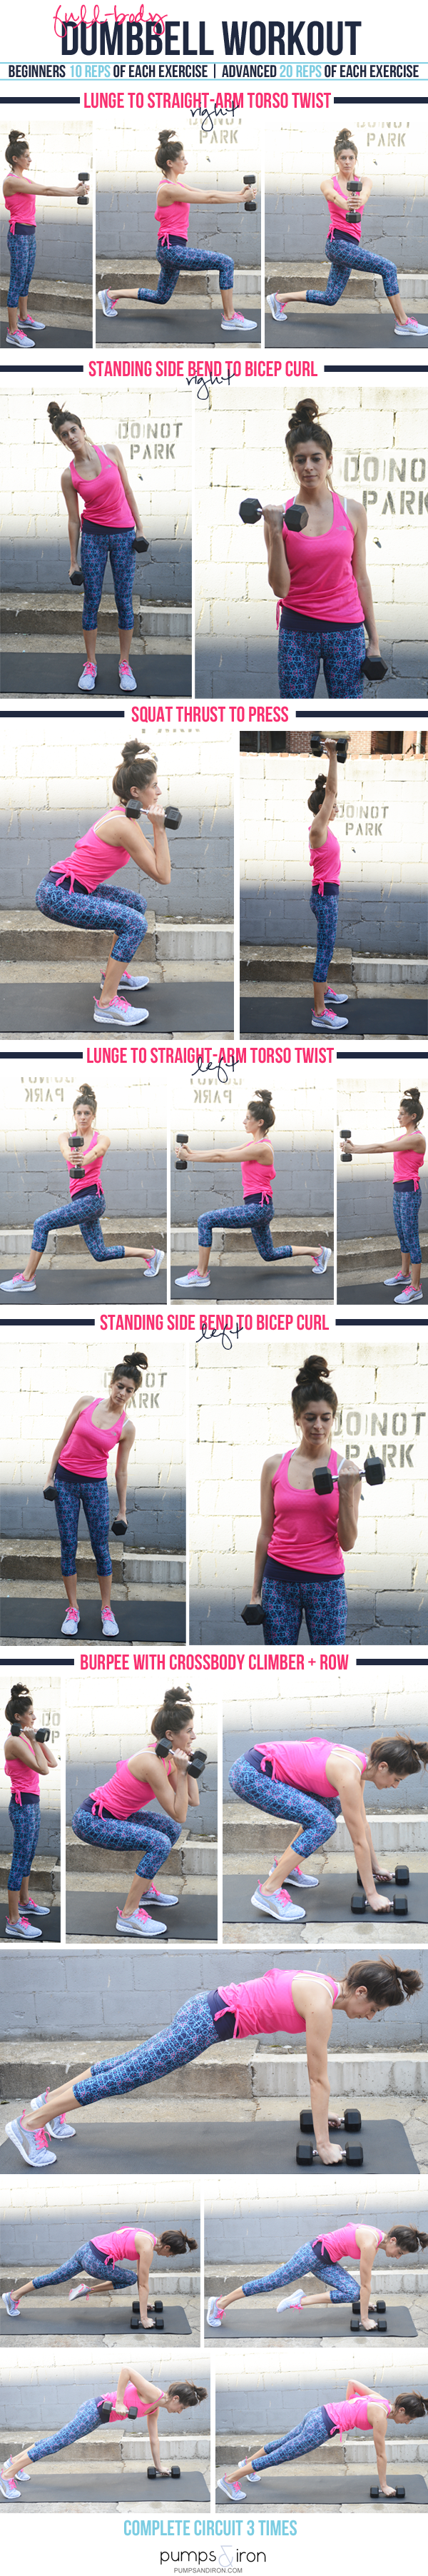 Full-Body Dumbbell Workout with Compound Exercises | Pumps ...